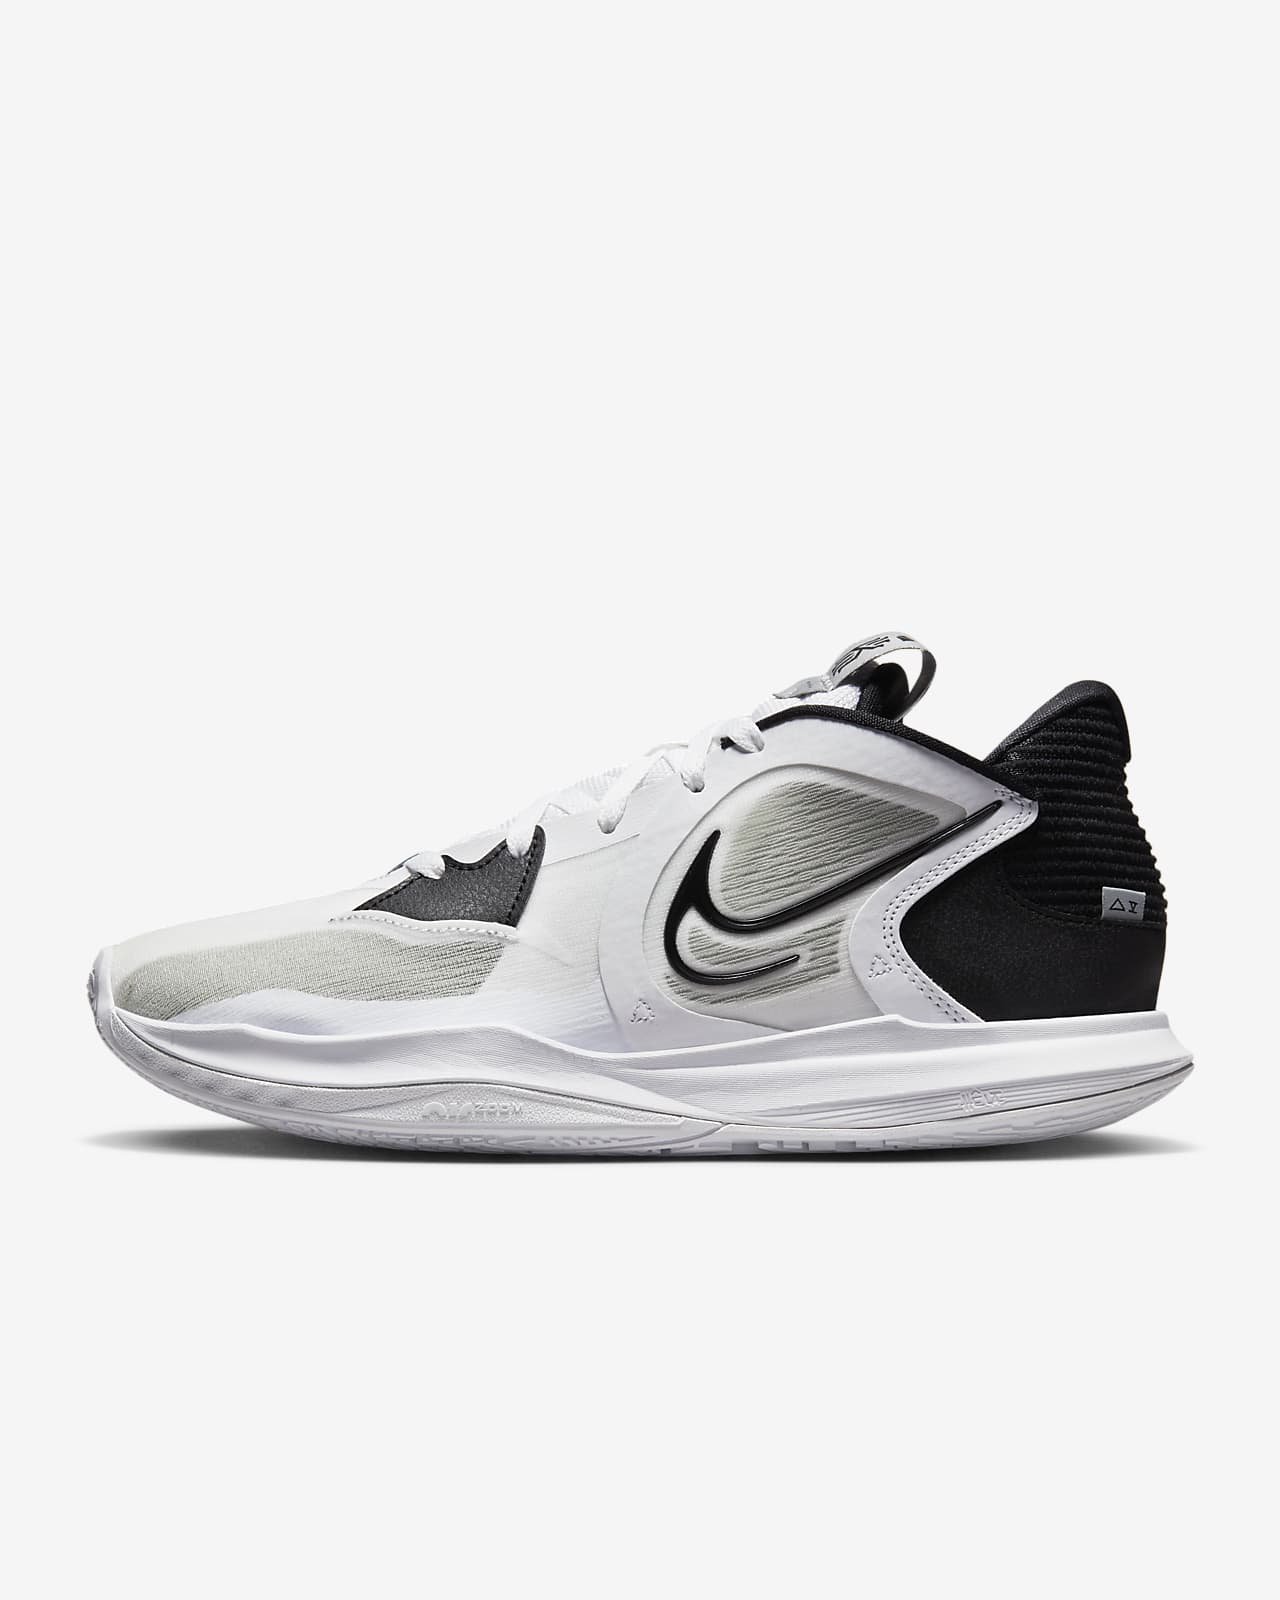 Kyrie Low 5 Basketball Shoes. Nike SI